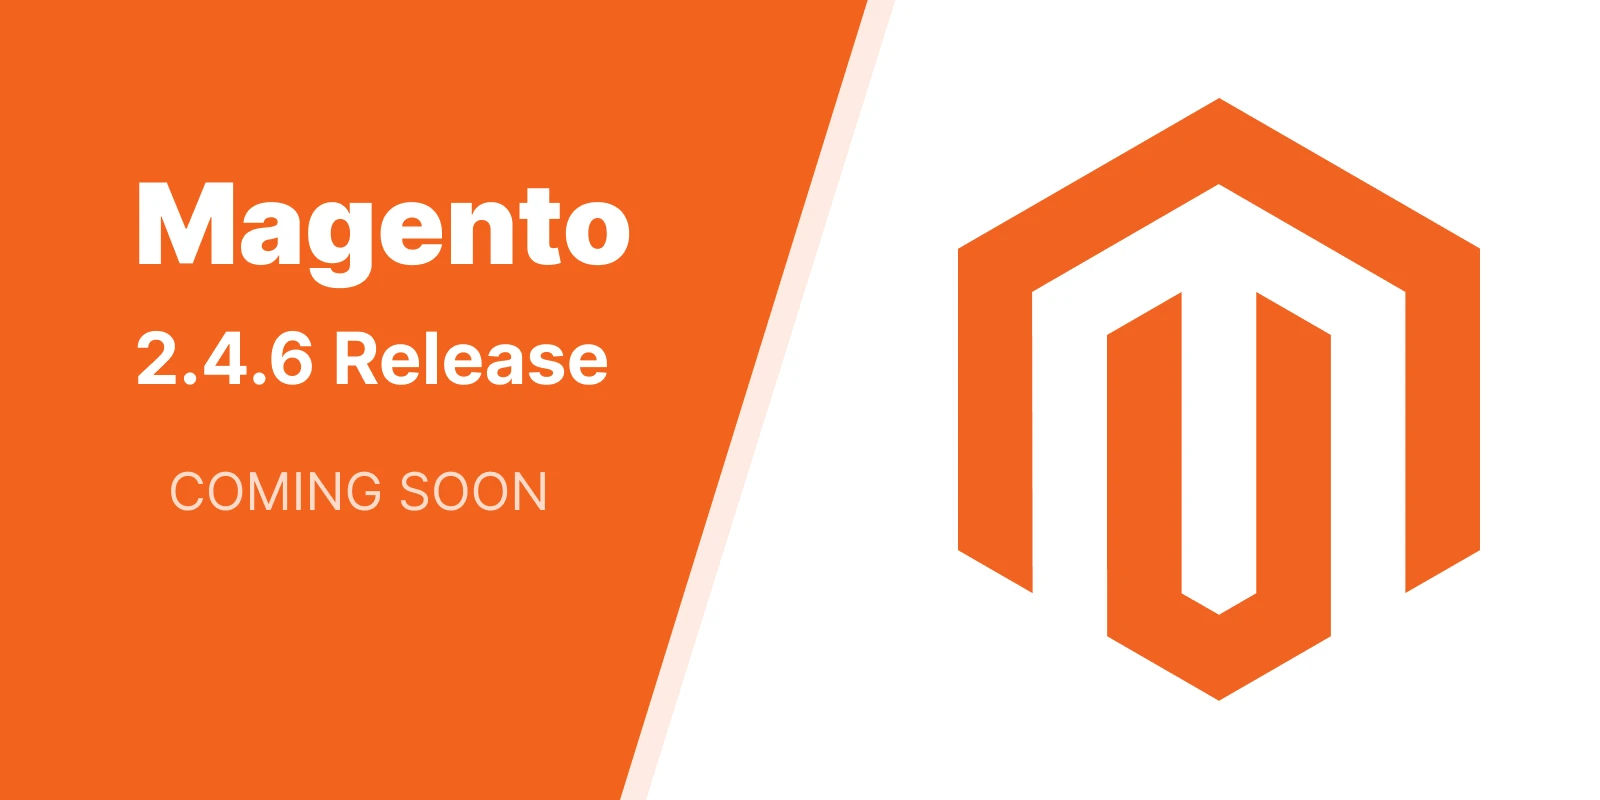 New Magento 2.4.6: what it brings?